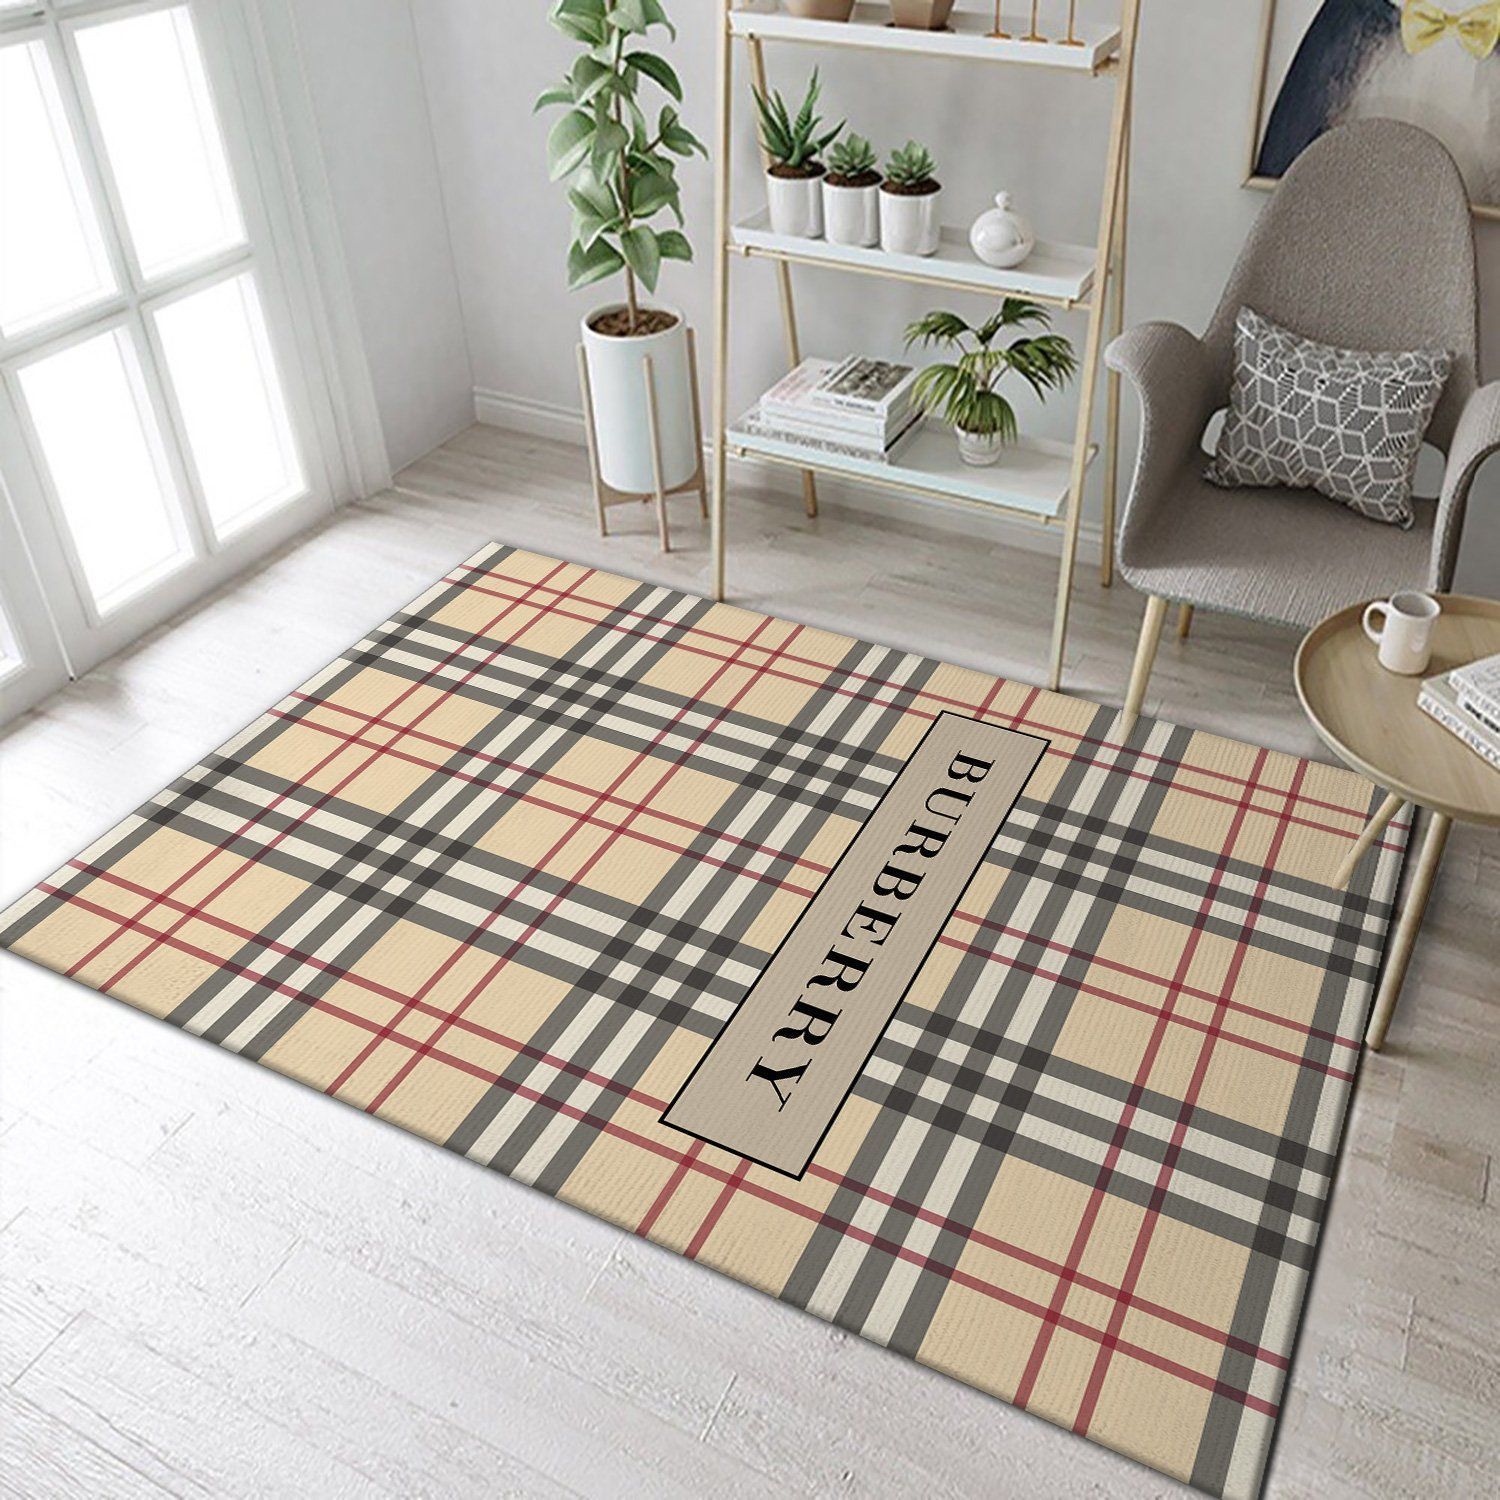 Burberry Logo Area Rugs Living Room Carpet FN241223 Brands Fashion Floor Decor The US Decor - Indoor Outdoor Rugs